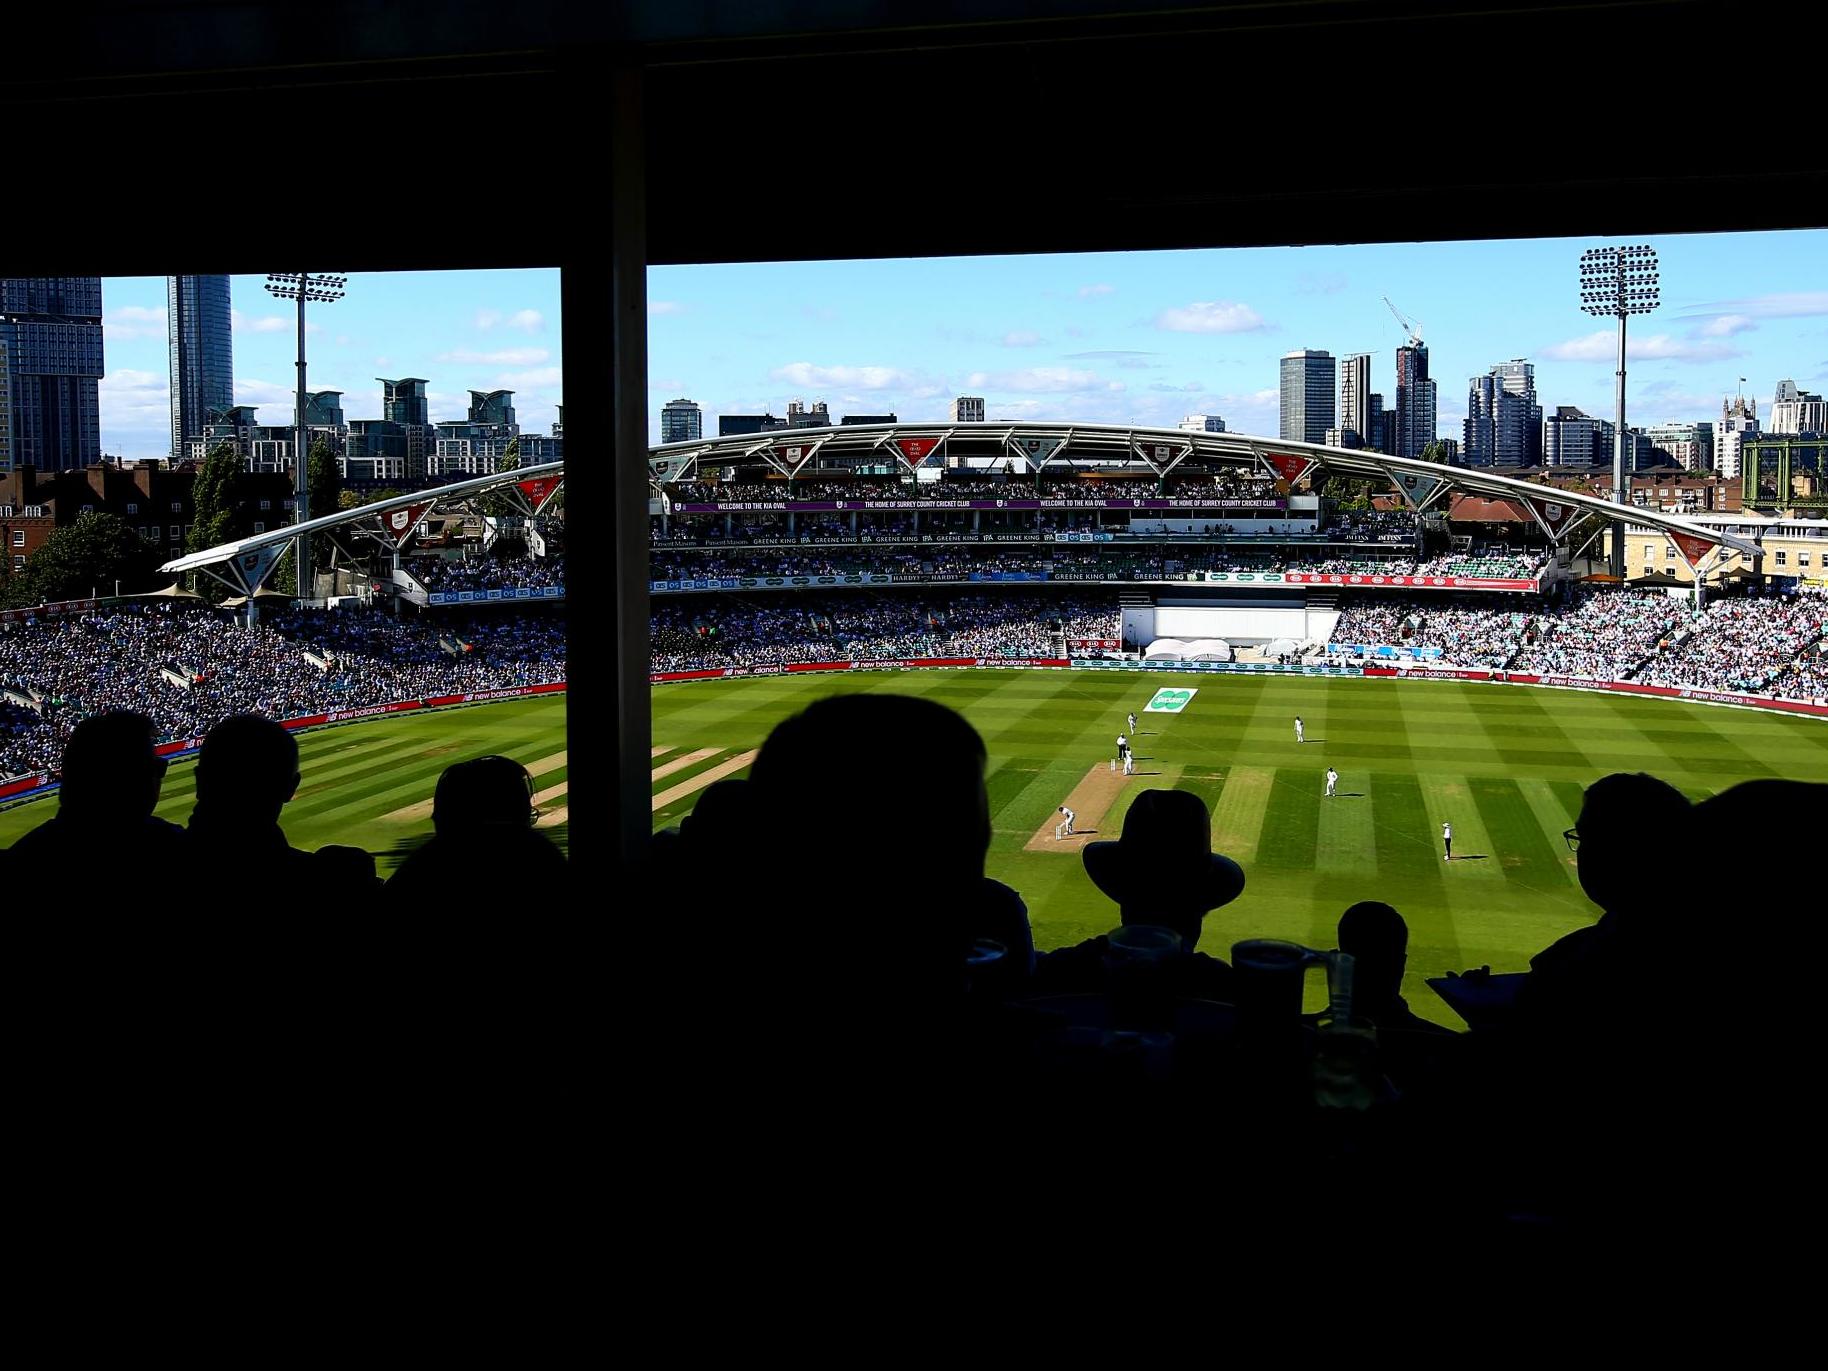 The Oval would have hosted the first Test on Thursday